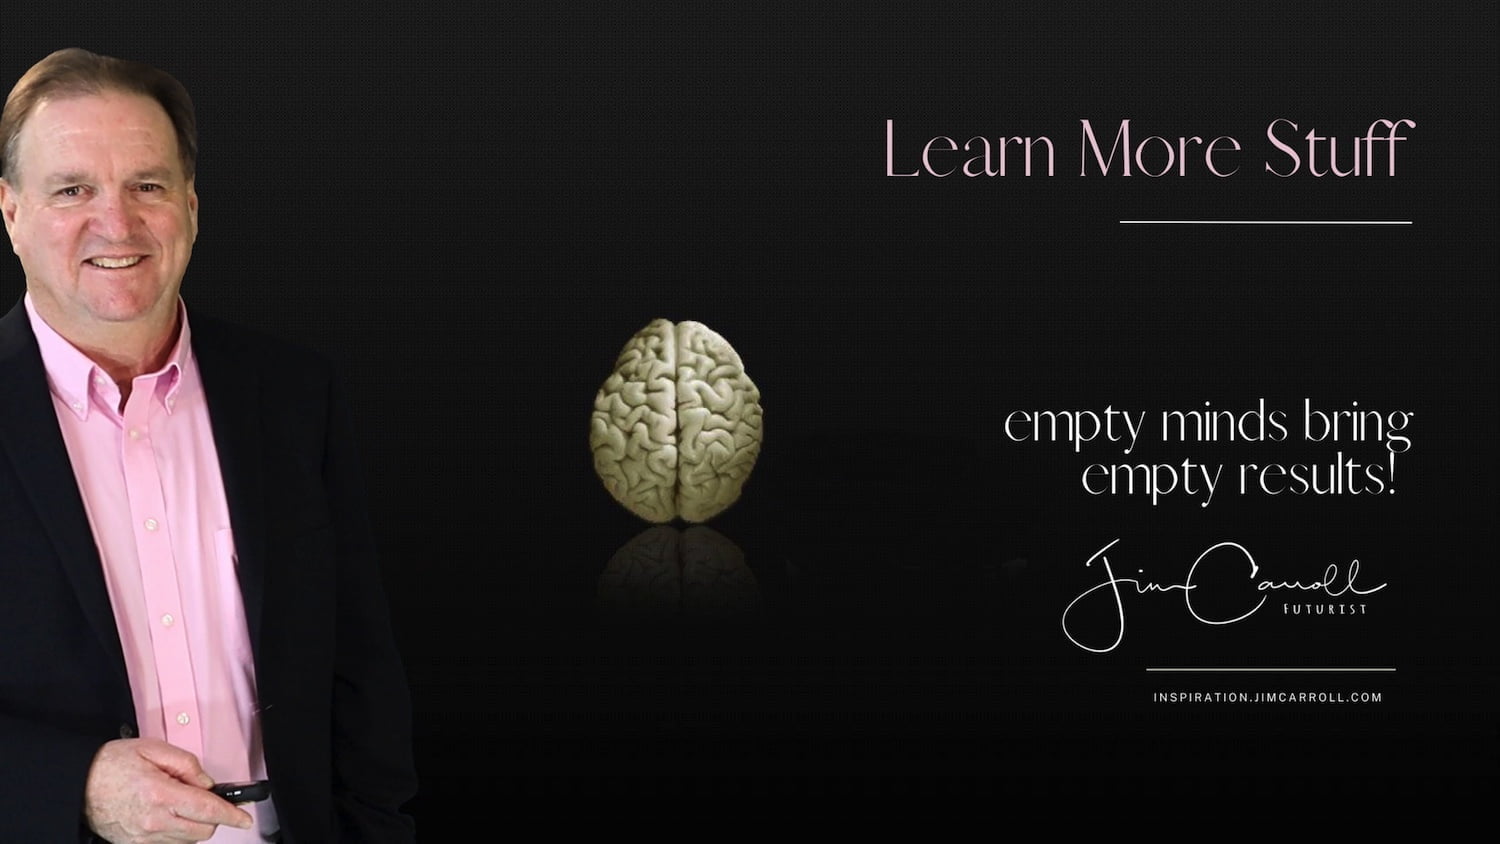 Daily Inspiration: "Learn more stuff. Empty minds bring empty results!"